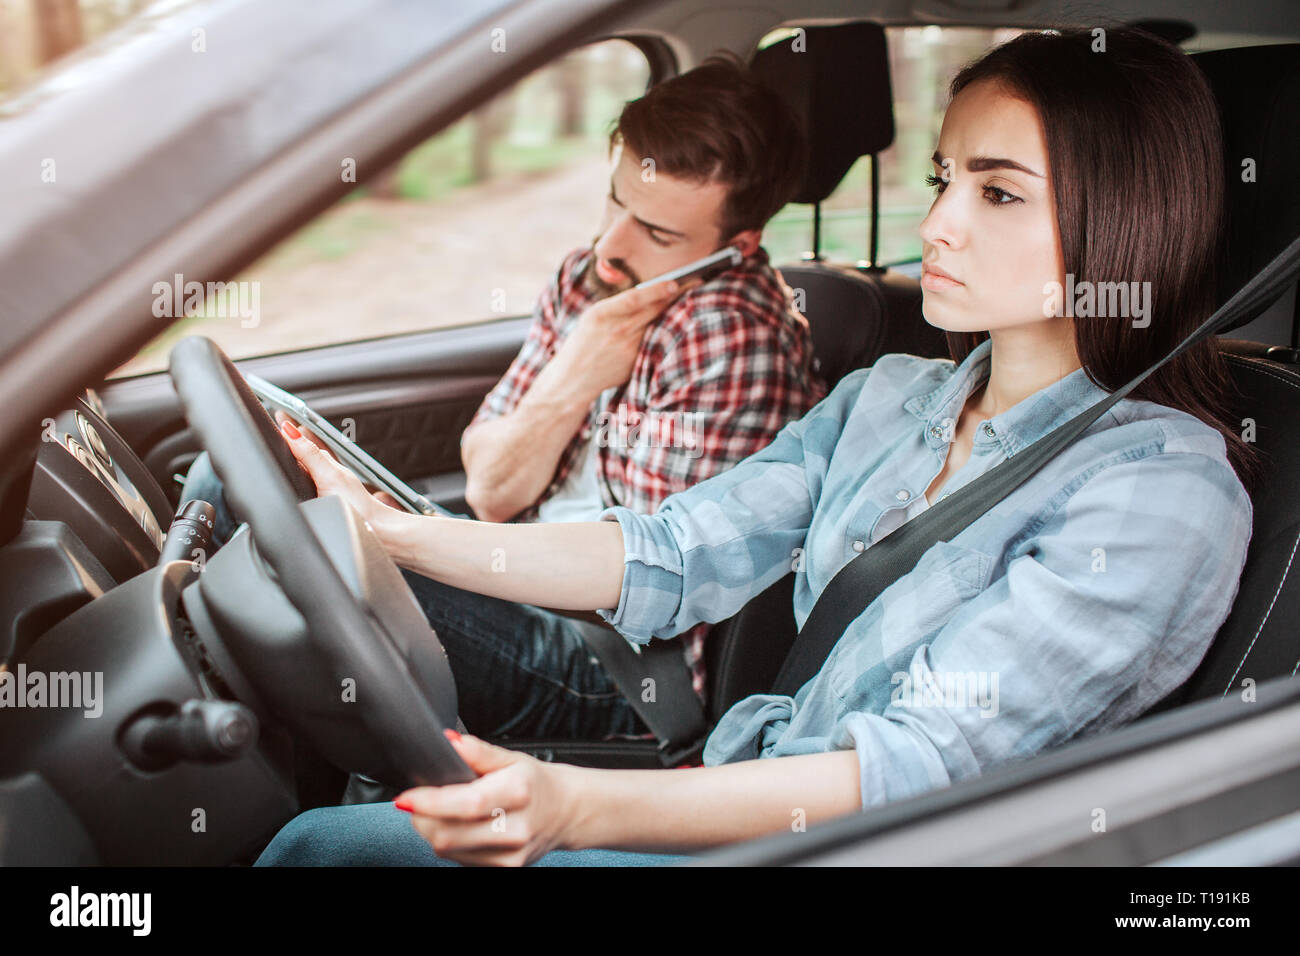 A picture of couple travelling in car. Guy is talking on the phone while girl is driving and paying attention to the road. She looks serious Stock Photo